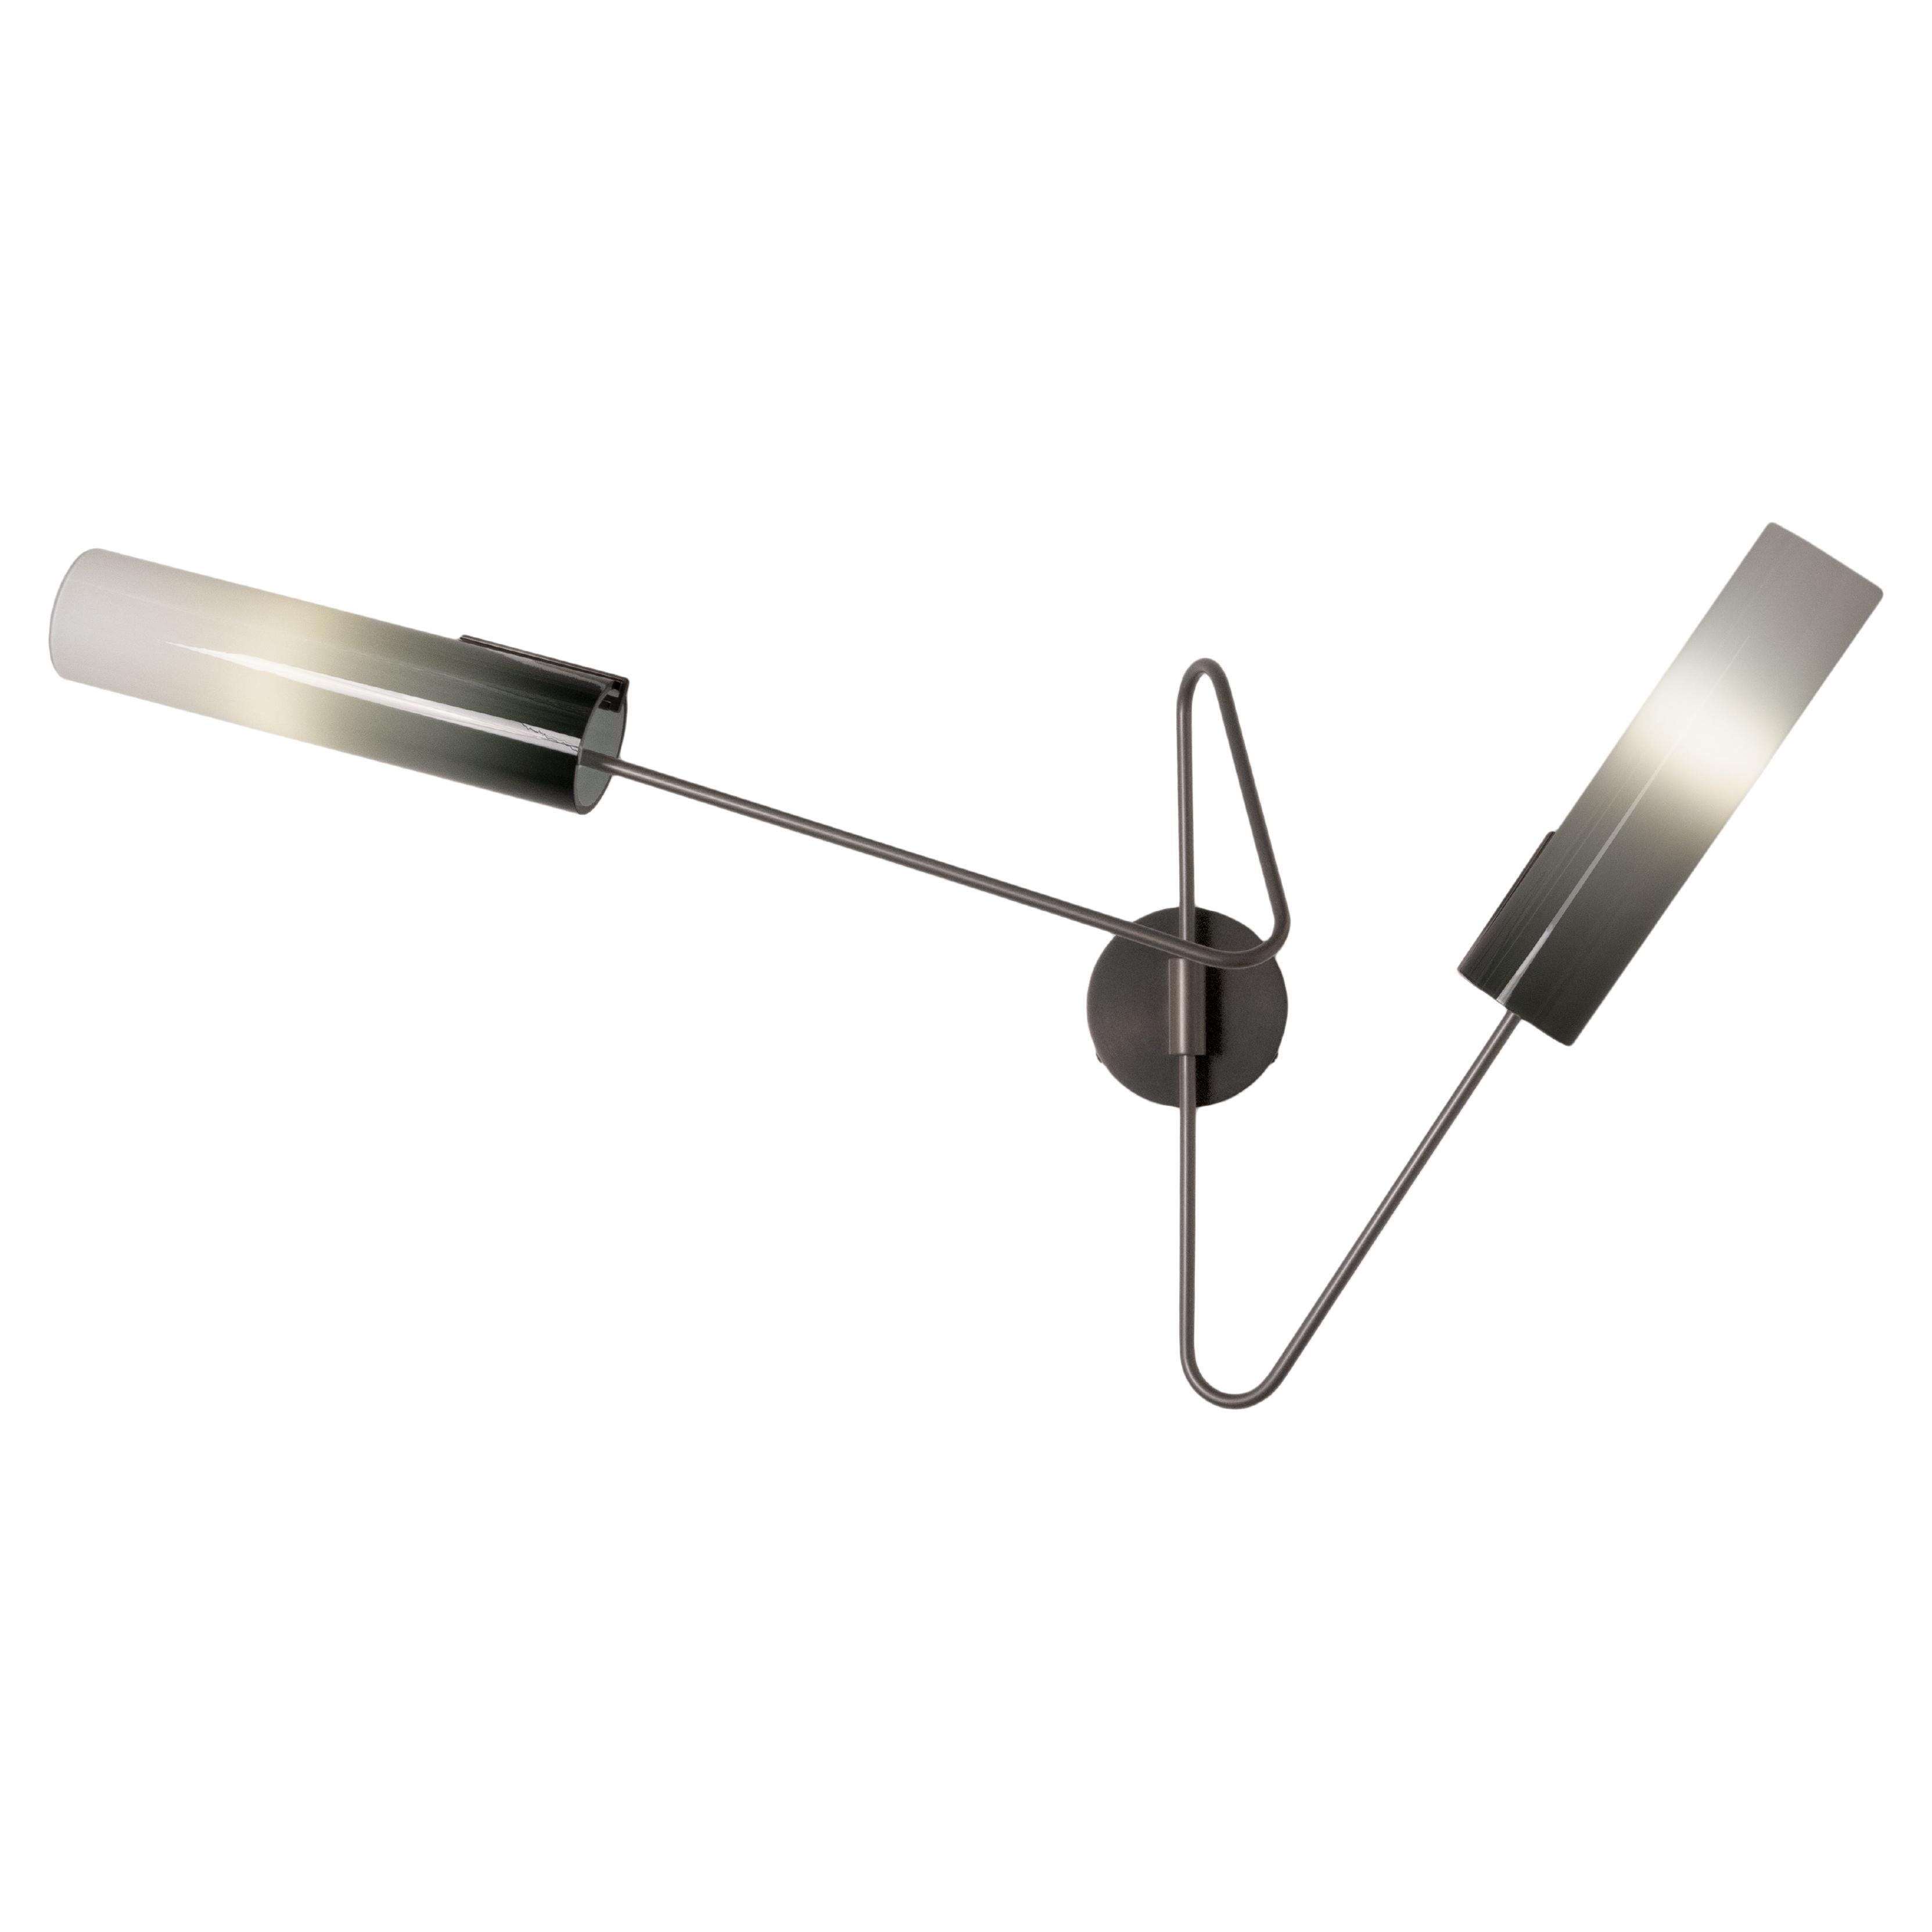 Continuum 03 Sconce: Oil-Rubbed Bronze/Charcoal Glass Shade by AVRAM RUSU STUDIO For Sale